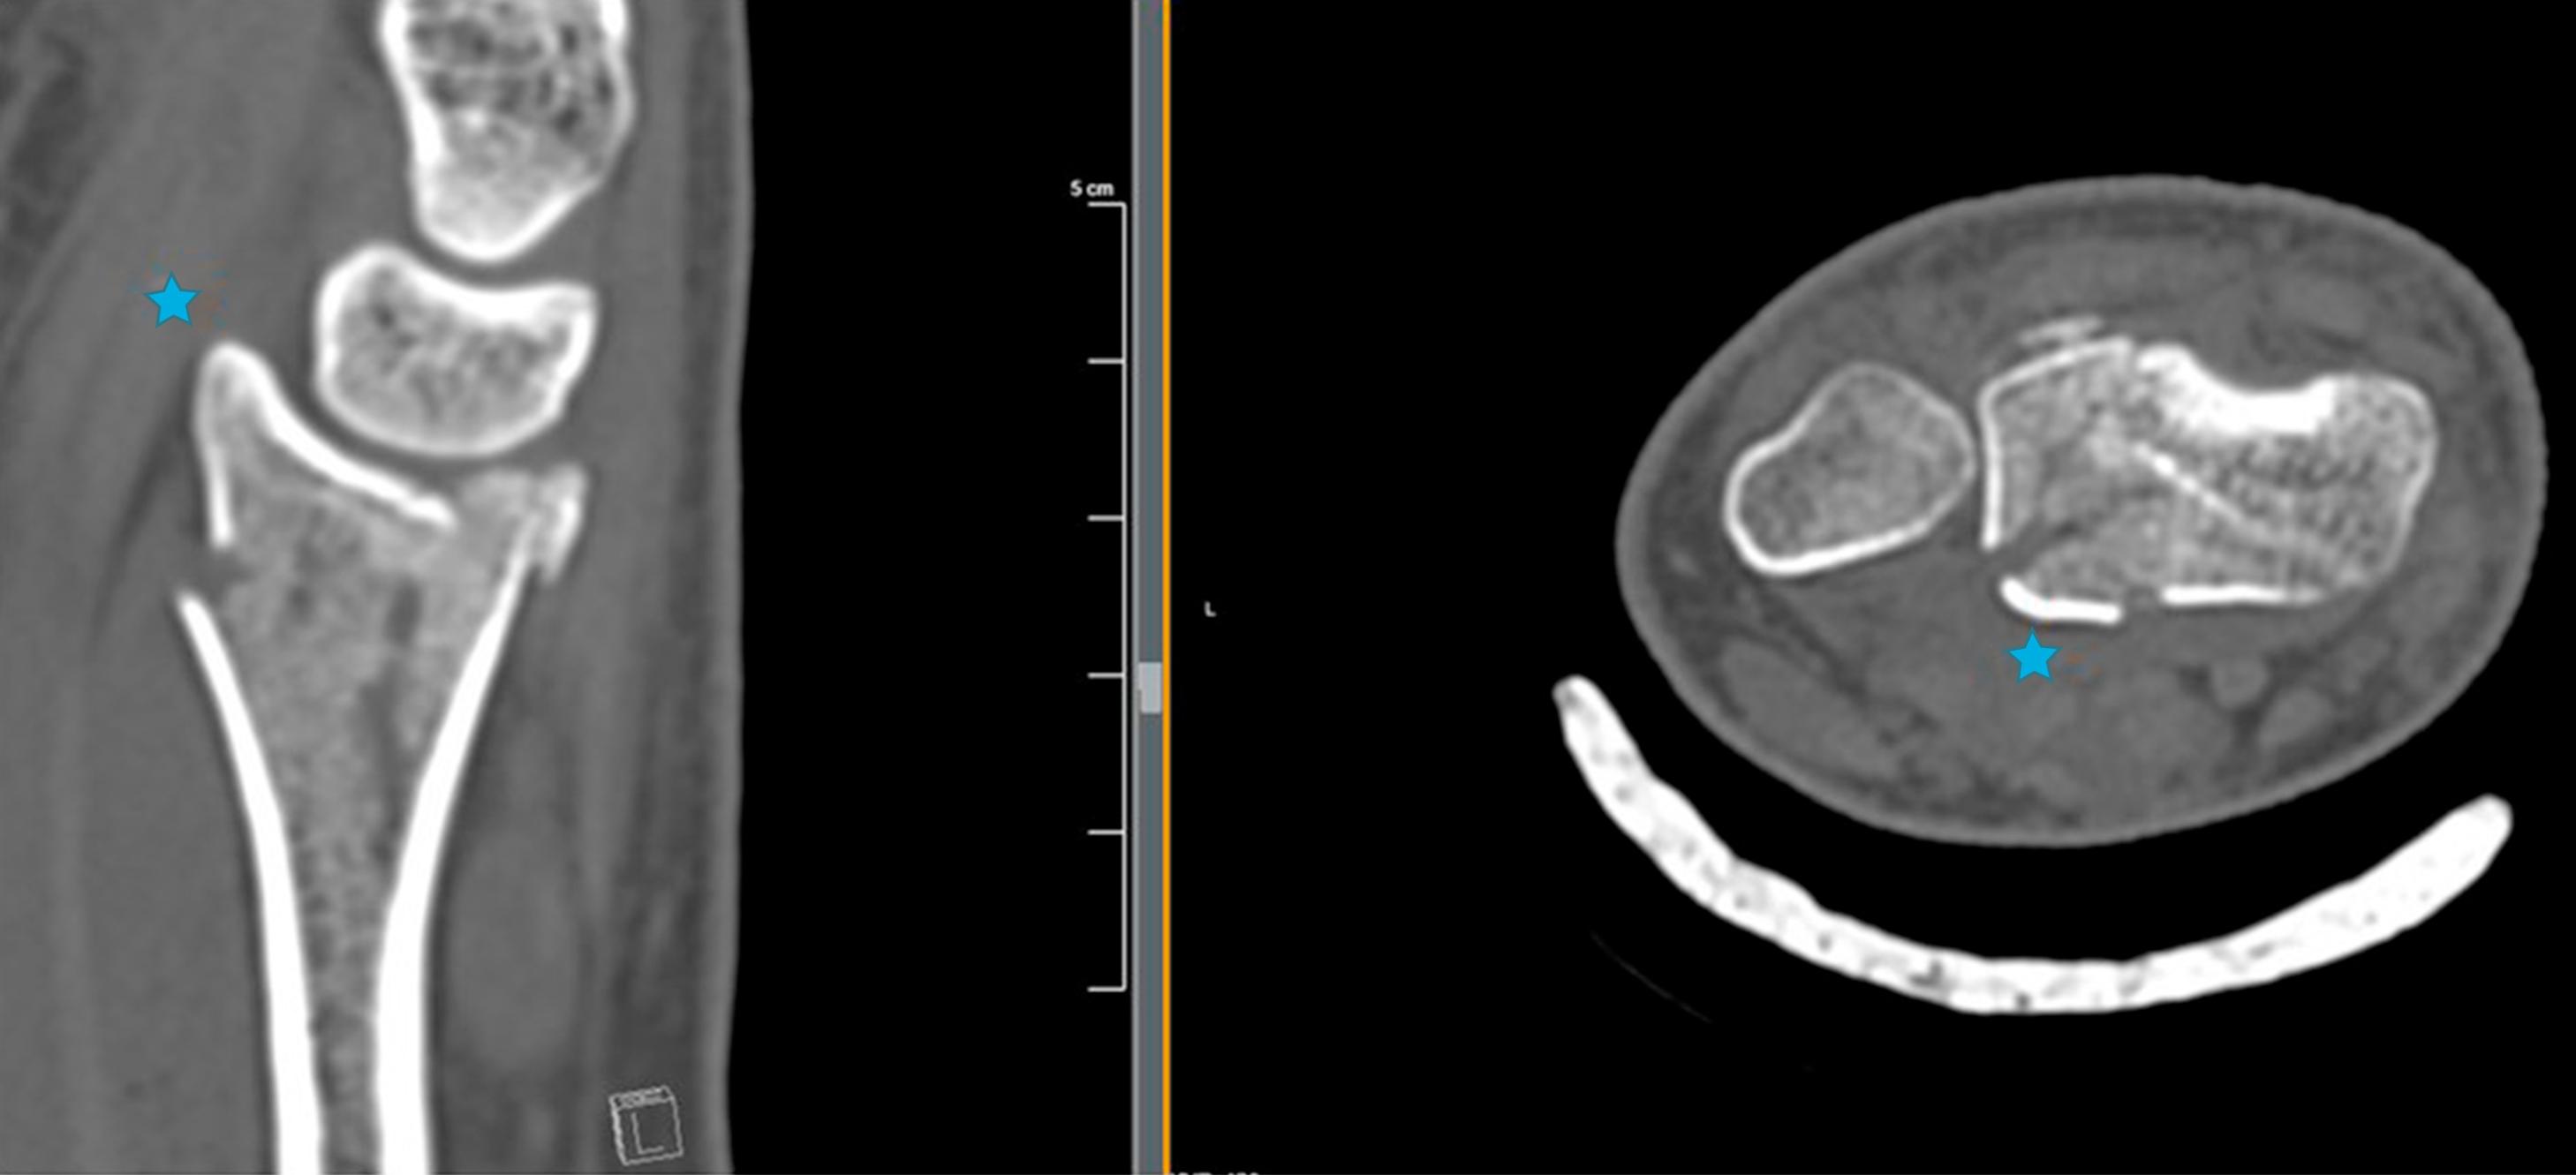 Fig. 60.4, Sagittal and axial computed tomography cuts of distal radius fracture demonstrating the exact size of volar lunate facet fracture (star) .